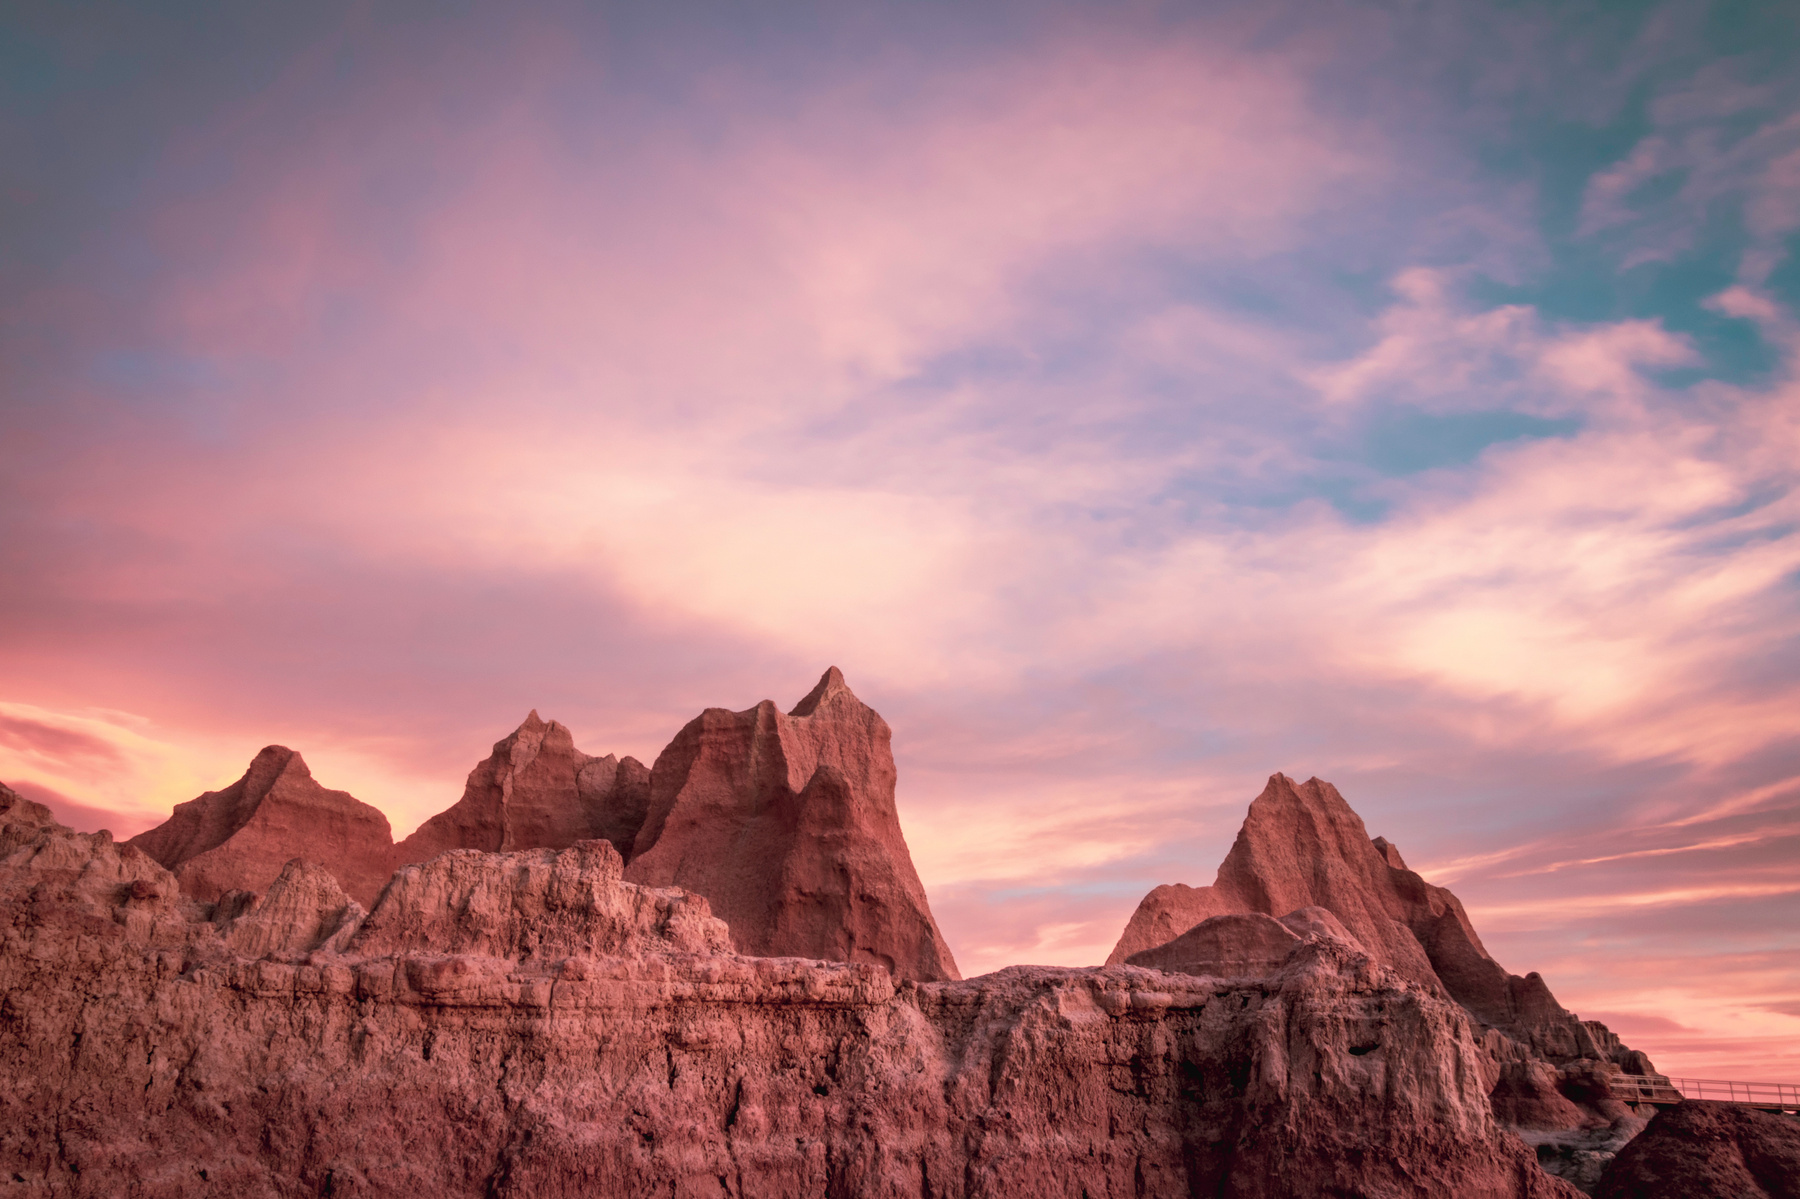 Beautiful winter sunrise at Badlands National Park in South Dakota with pink pastel clouds above the rock formations.